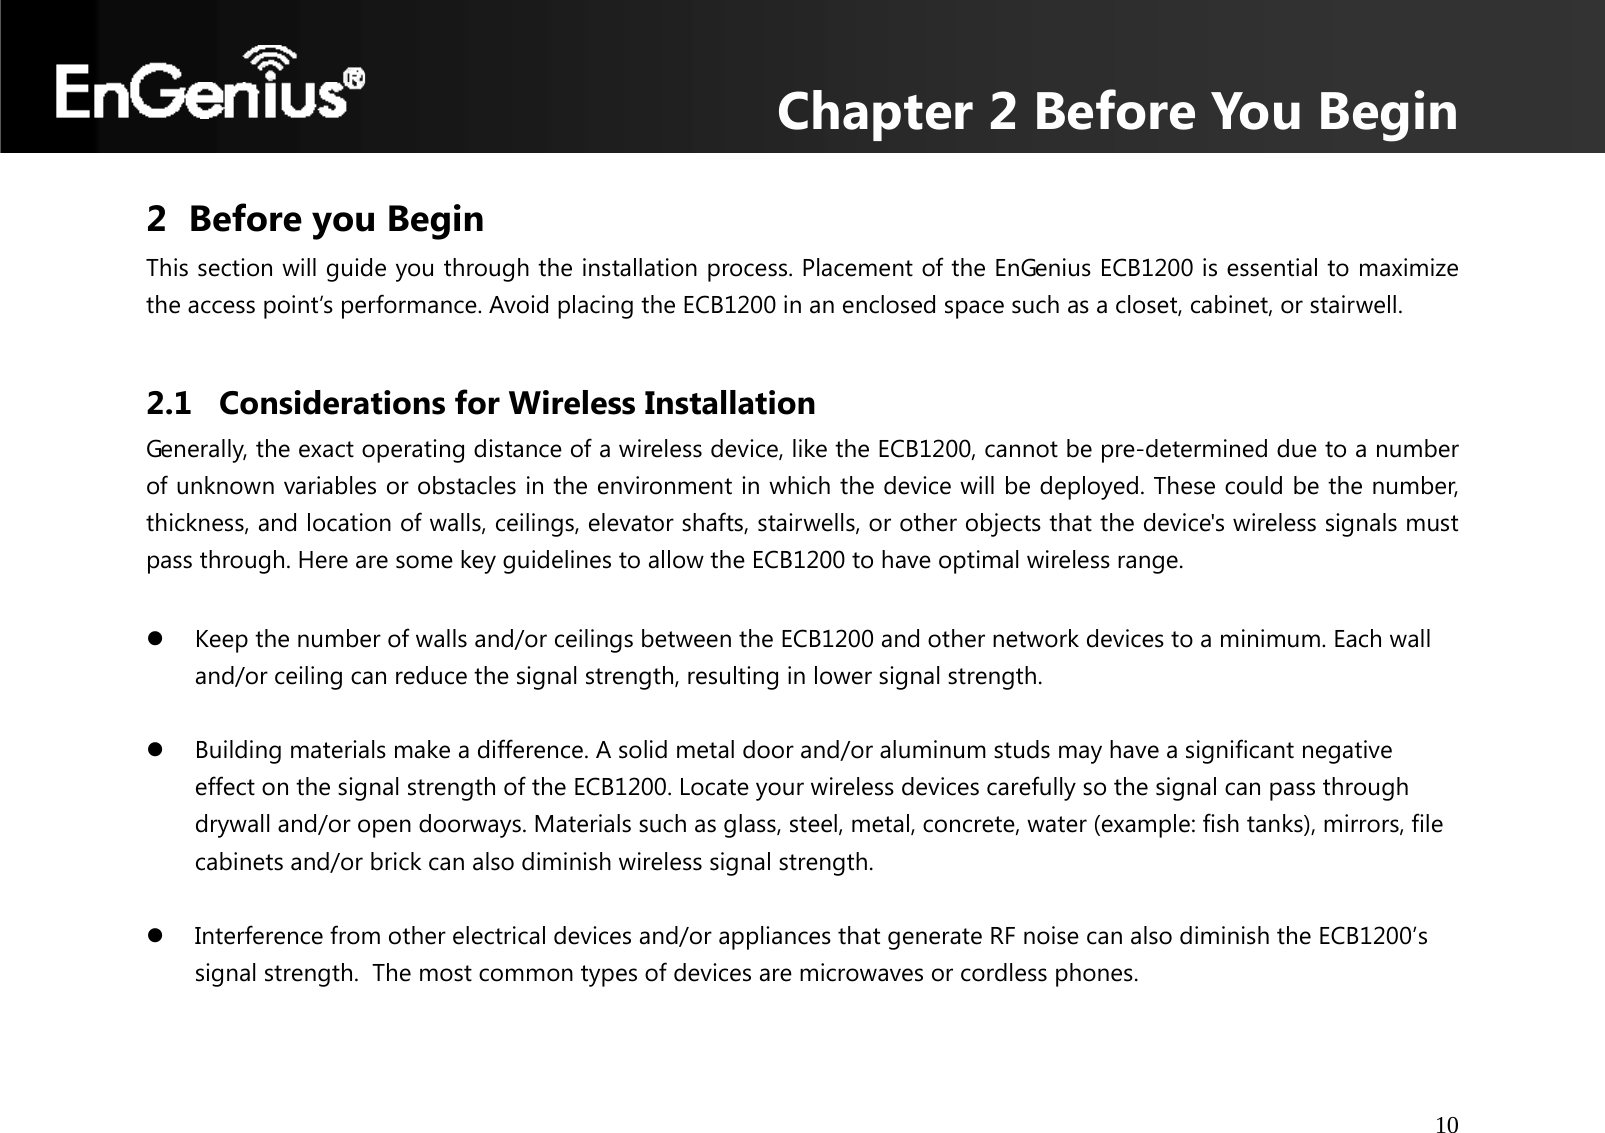 Chapter 2 Before You Begin 10  2 Before you Begin This section will guide you through the installation process. Placement of the EnGenius ECB1200 is essential to maximize the access point’s performance. Avoid placing the ECB1200 in an enclosed space such as a closet, cabinet, or stairwell.  2.1 Considerations for Wireless Installation Generally, the exact operating distance of a wireless device, like the ECB1200, cannot be pre-determined due to a number of unknown variables or obstacles in the environment in which the device will be deployed. These could be the number, thickness, and location of walls, ceilings, elevator shafts, stairwells, or other objects that the device&apos;s wireless signals must pass through. Here are some key guidelines to allow the ECB1200 to have optimal wireless range.  z Keep the number of walls and/or ceilings between the ECB1200 and other network devices to a minimum. Each wall and/or ceiling can reduce the signal strength, resulting in lower signal strength.  z Building materials make a difference. A solid metal door and/or aluminum studs may have a significant negative effect on the signal strength of the ECB1200. Locate your wireless devices carefully so the signal can pass through drywall and/or open doorways. Materials such as glass, steel, metal, concrete, water (example: fish tanks), mirrors, file cabinets and/or brick can also diminish wireless signal strength.  z Interference from other electrical devices and/or appliances that generate RF noise can also diminish the ECB1200’s signal strength.  The most common types of devices are microwaves or cordless phones.  